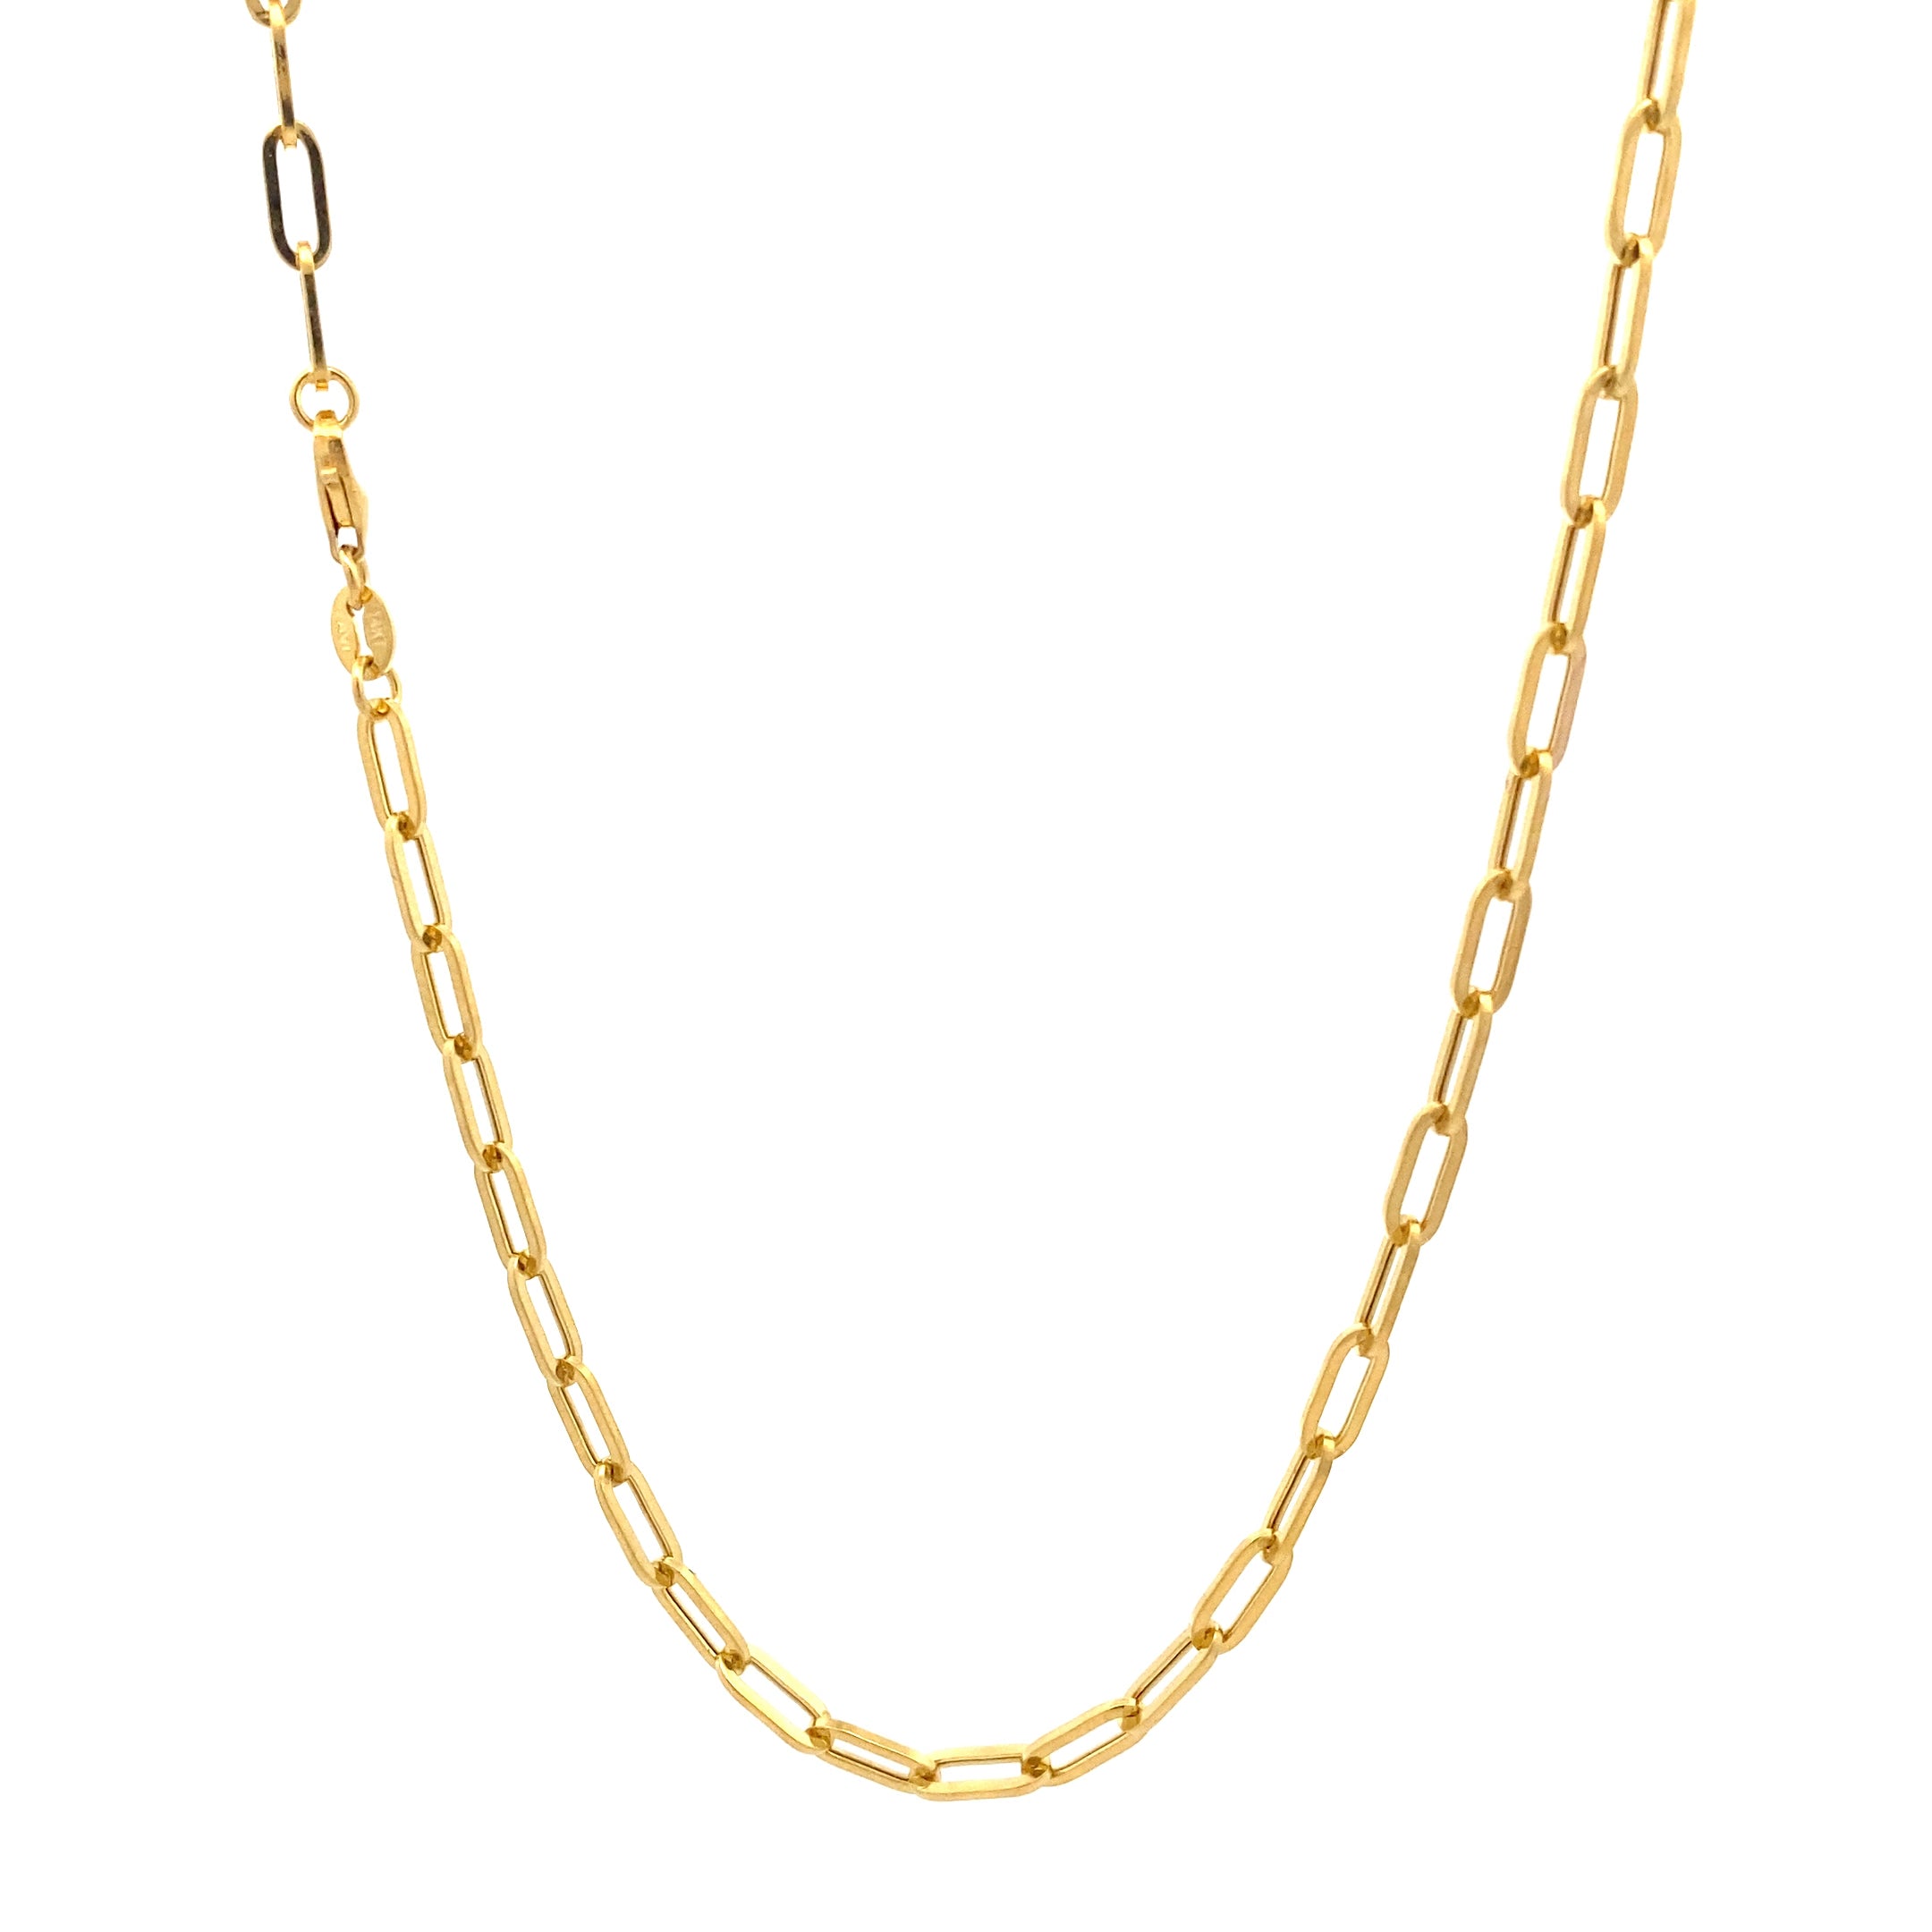 New 14K Yellow Gold Paperclip Chain